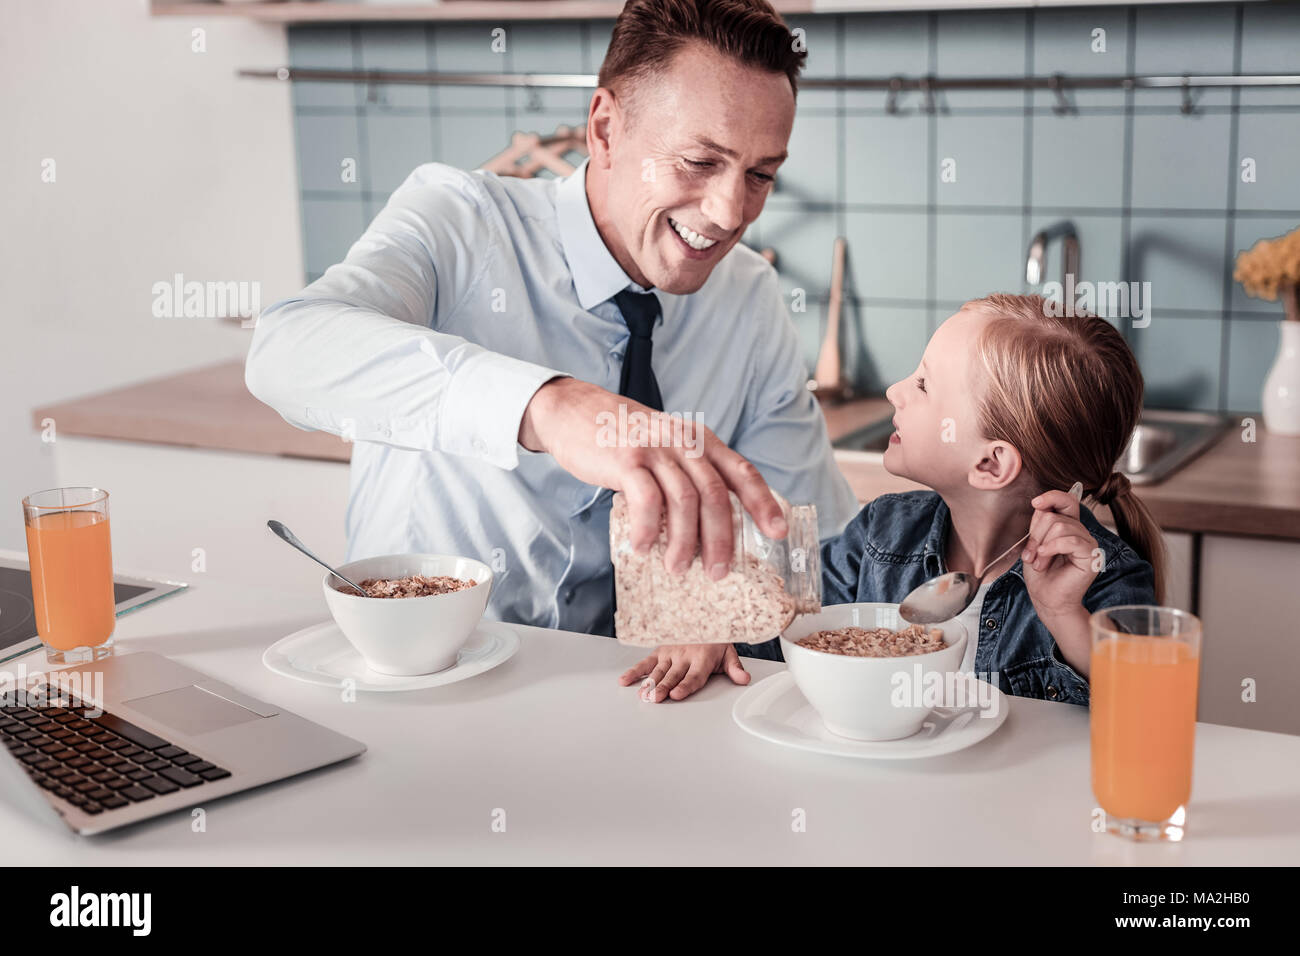 Healthy food. Cheerful man keeping smile on his face and pouring down corn flakes while talking with his daughter Stock Photo